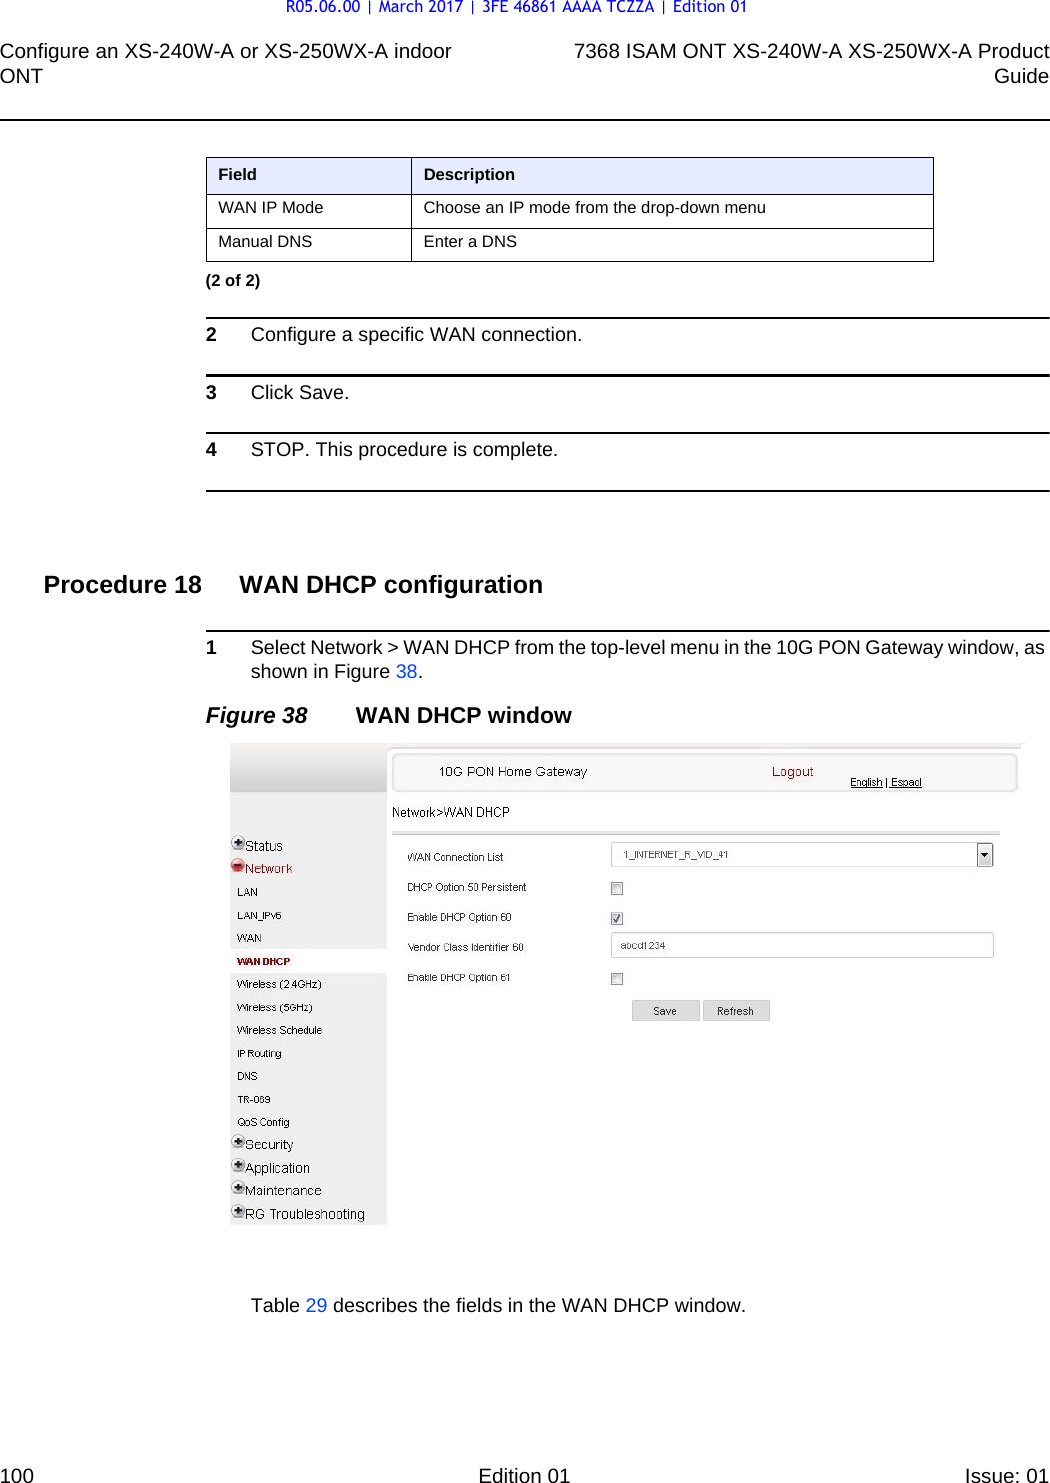 Configure an XS-240W-A or XS-250WX-A indoor ONT1007368 ISAM ONT XS-240W-A XS-250WX-A ProductGuideEdition 01 Issue: 01 2Configure a specific WAN connection.3Click Save.4STOP. This procedure is complete.Procedure 18 WAN DHCP configuration1Select Network &gt; WAN DHCP from the top-level menu in the 10G PON Gateway window, as shown in Figure 38.Figure 38 WAN DHCP windowTable 29 describes the fields in the WAN DHCP window.WAN IP Mode Choose an IP mode from the drop-down menuManual DNS Enter a DNSField Description(2 of 2)R05.06.00 | March 2017 | 3FE 46861 AAAA TCZZA | Edition 01